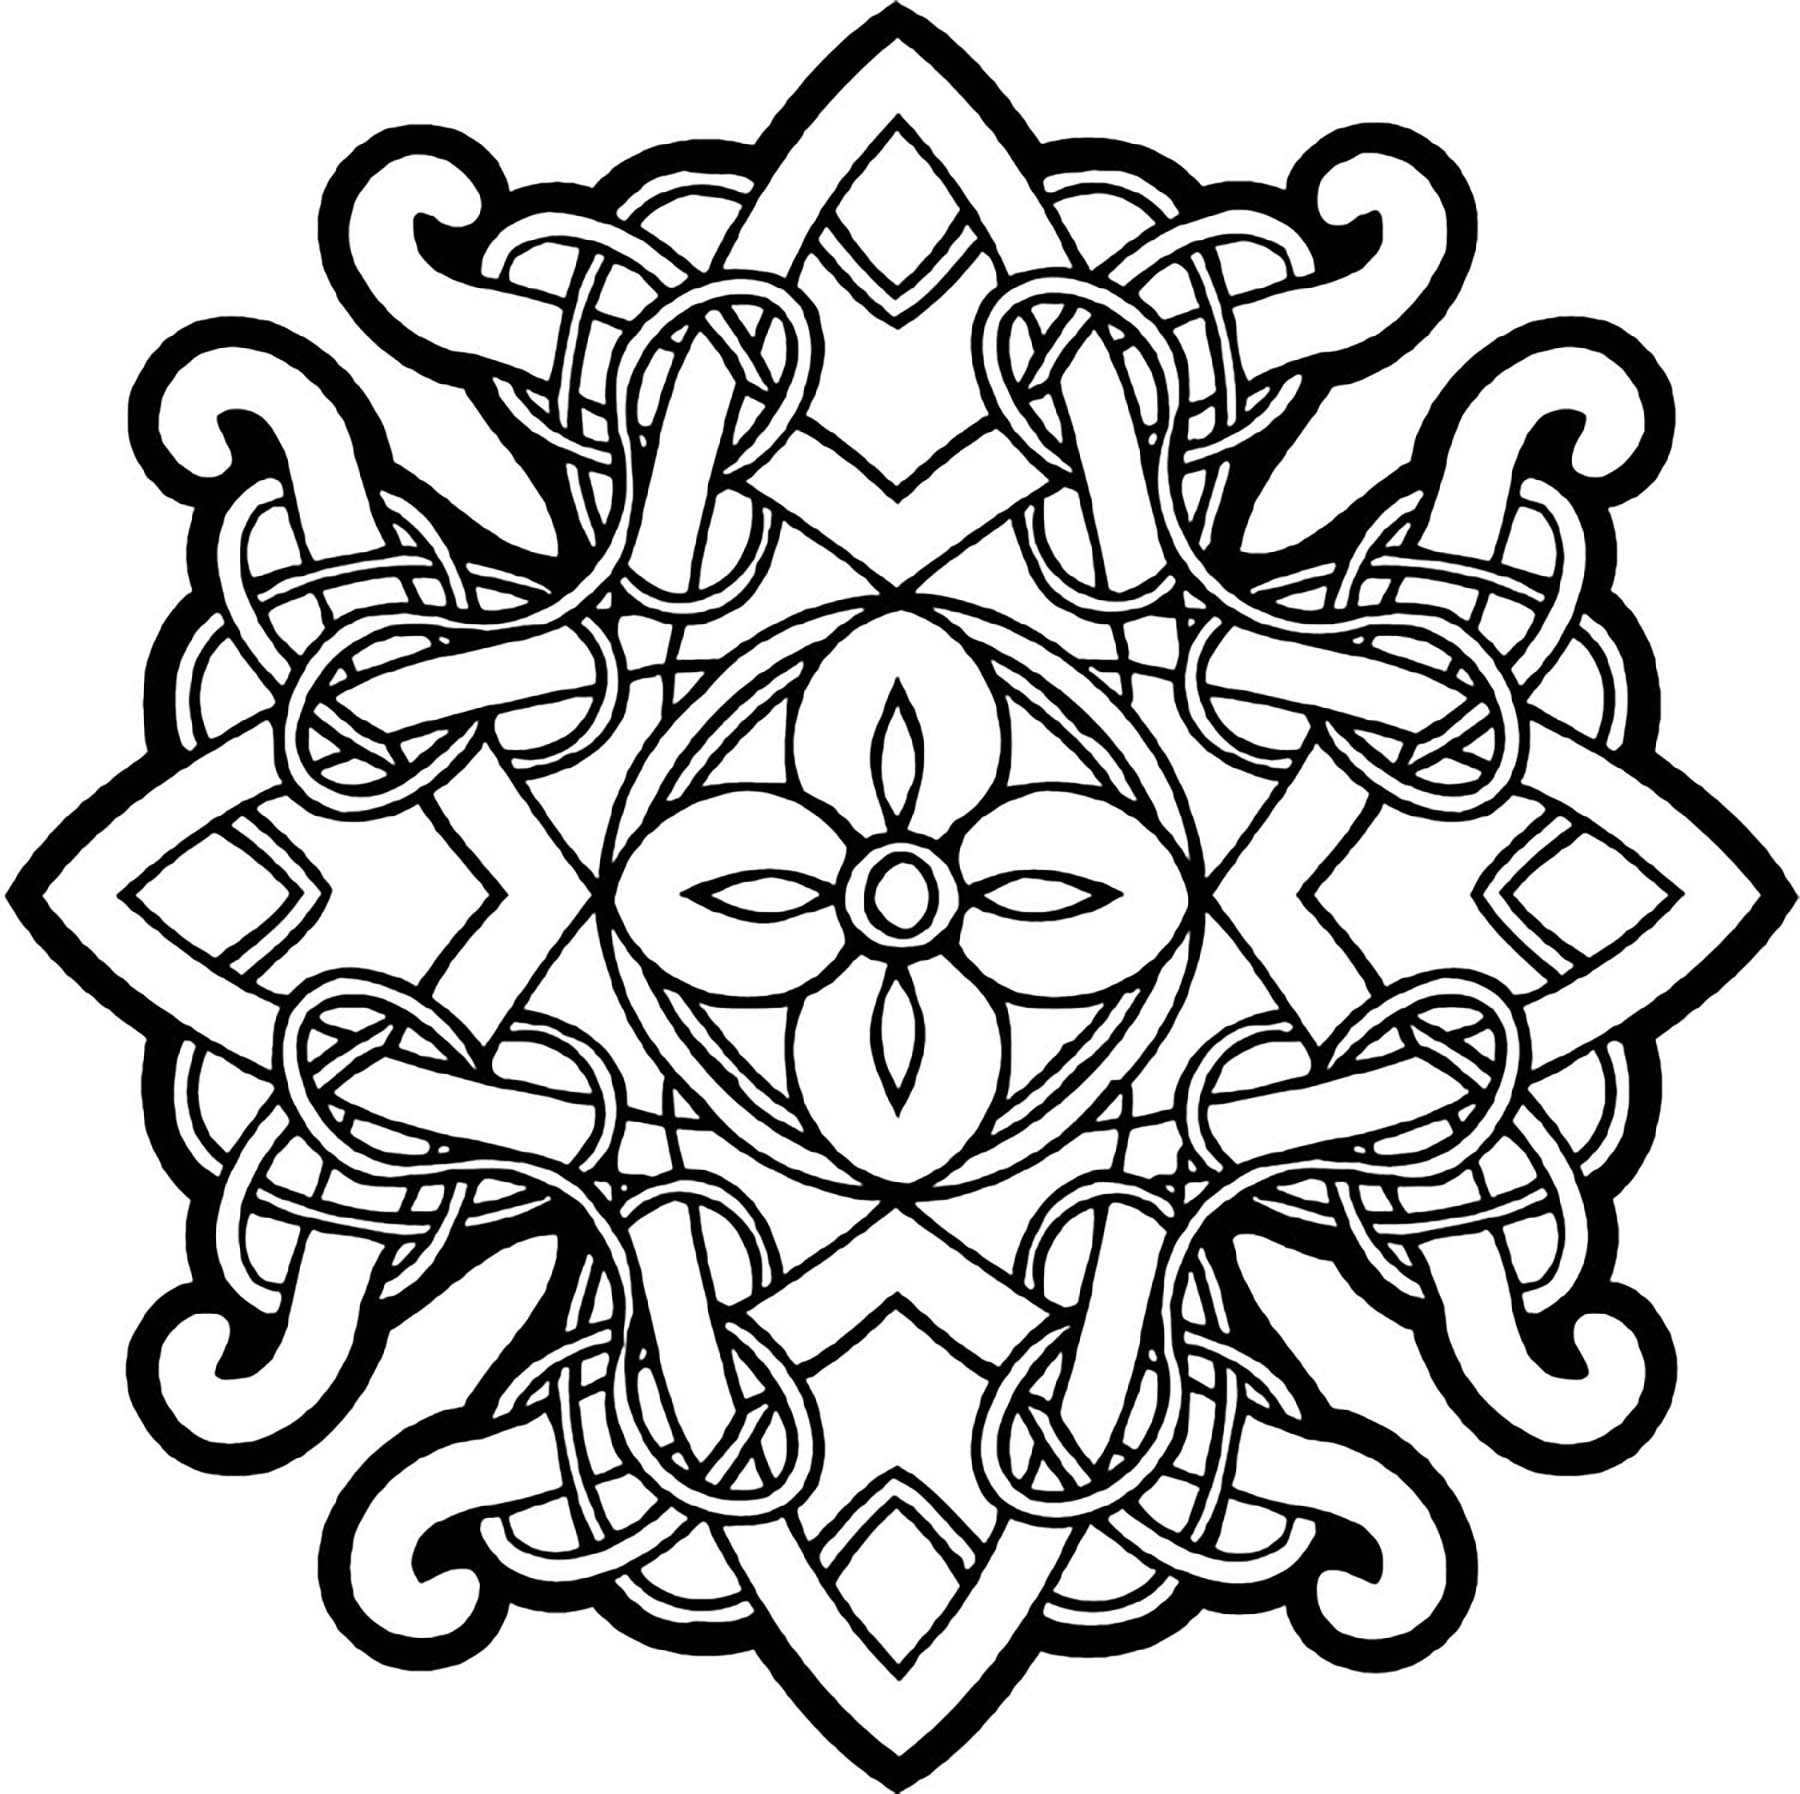 Elegant and harmonious Mandala ... When coloring can really relax you ... This is the case with this Mandala coloring page of high quality.